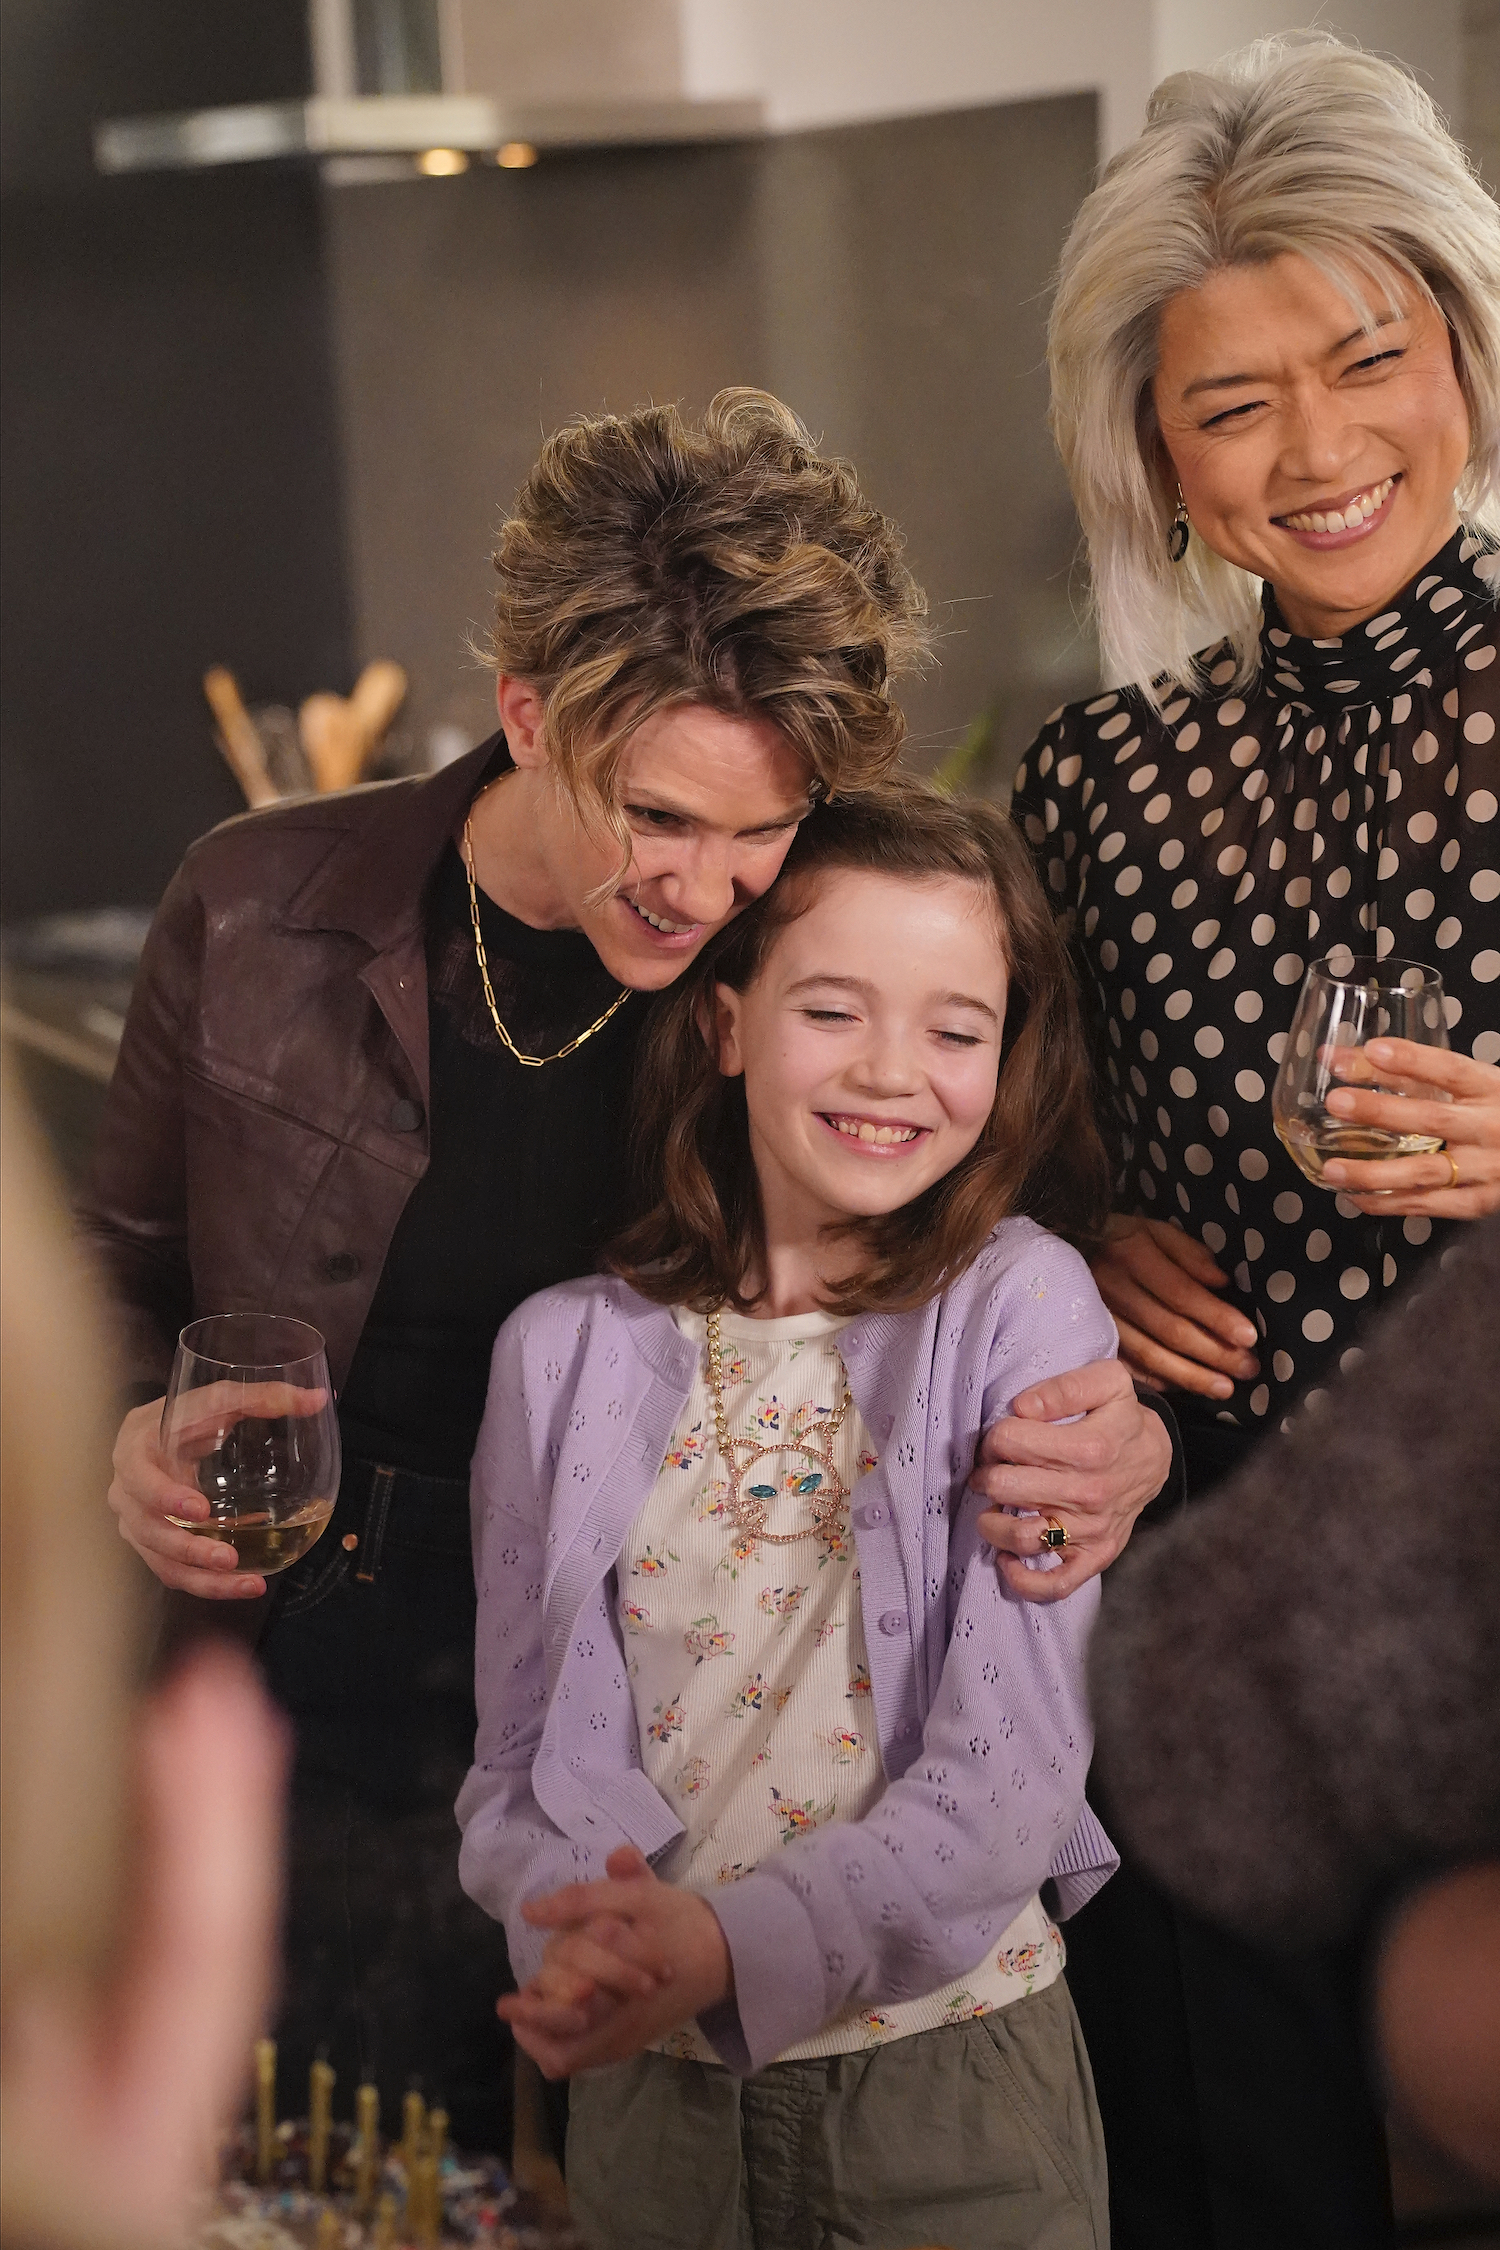 Cameron Esposito, Audrey Wise Alvarez, and Grace Park in 'A Million Little Things'